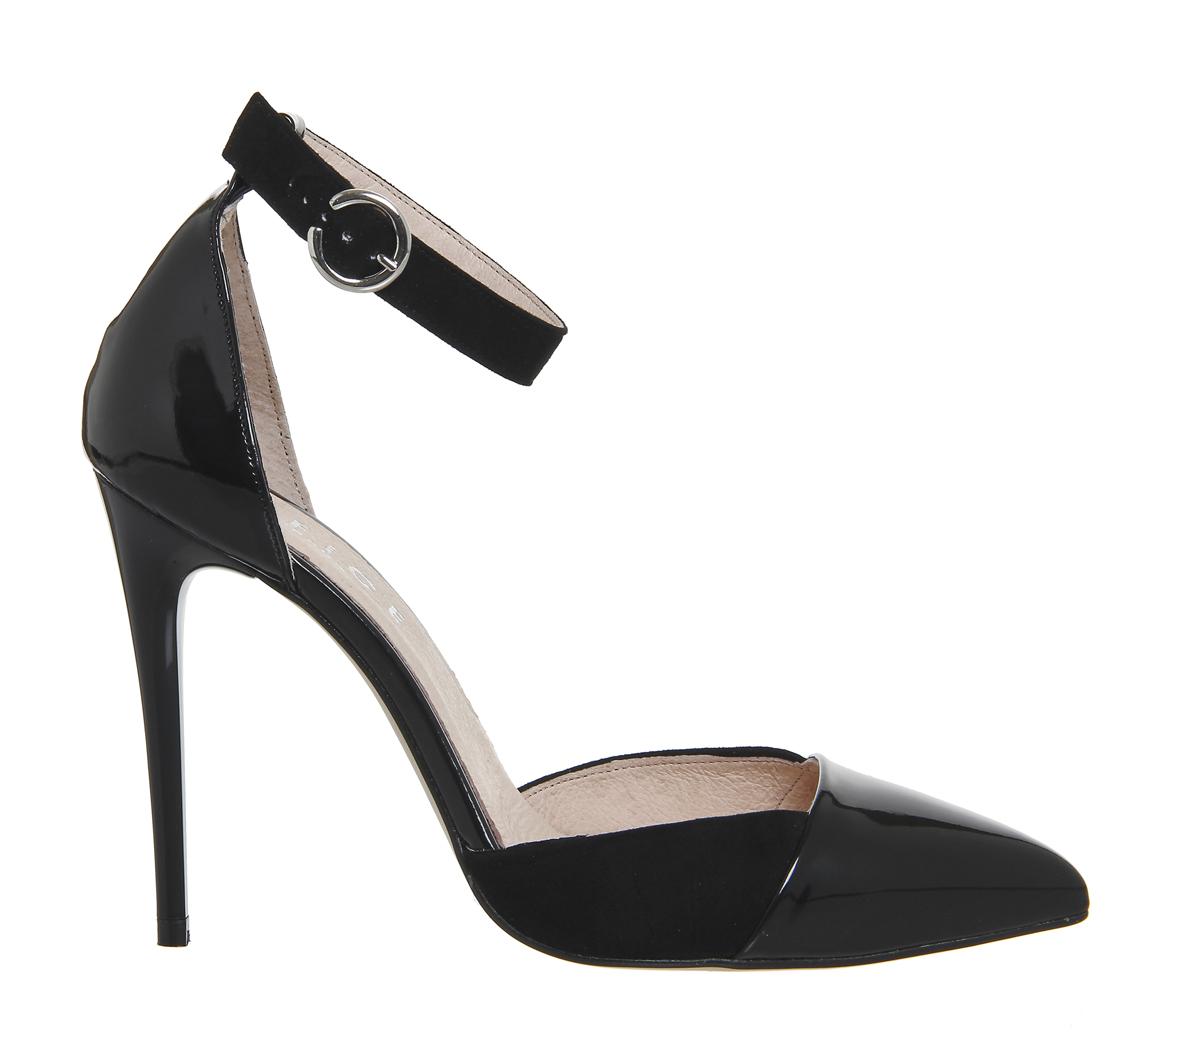 OFFICE Now 2 Part Courts Black Suede Patent Mix - High Heels